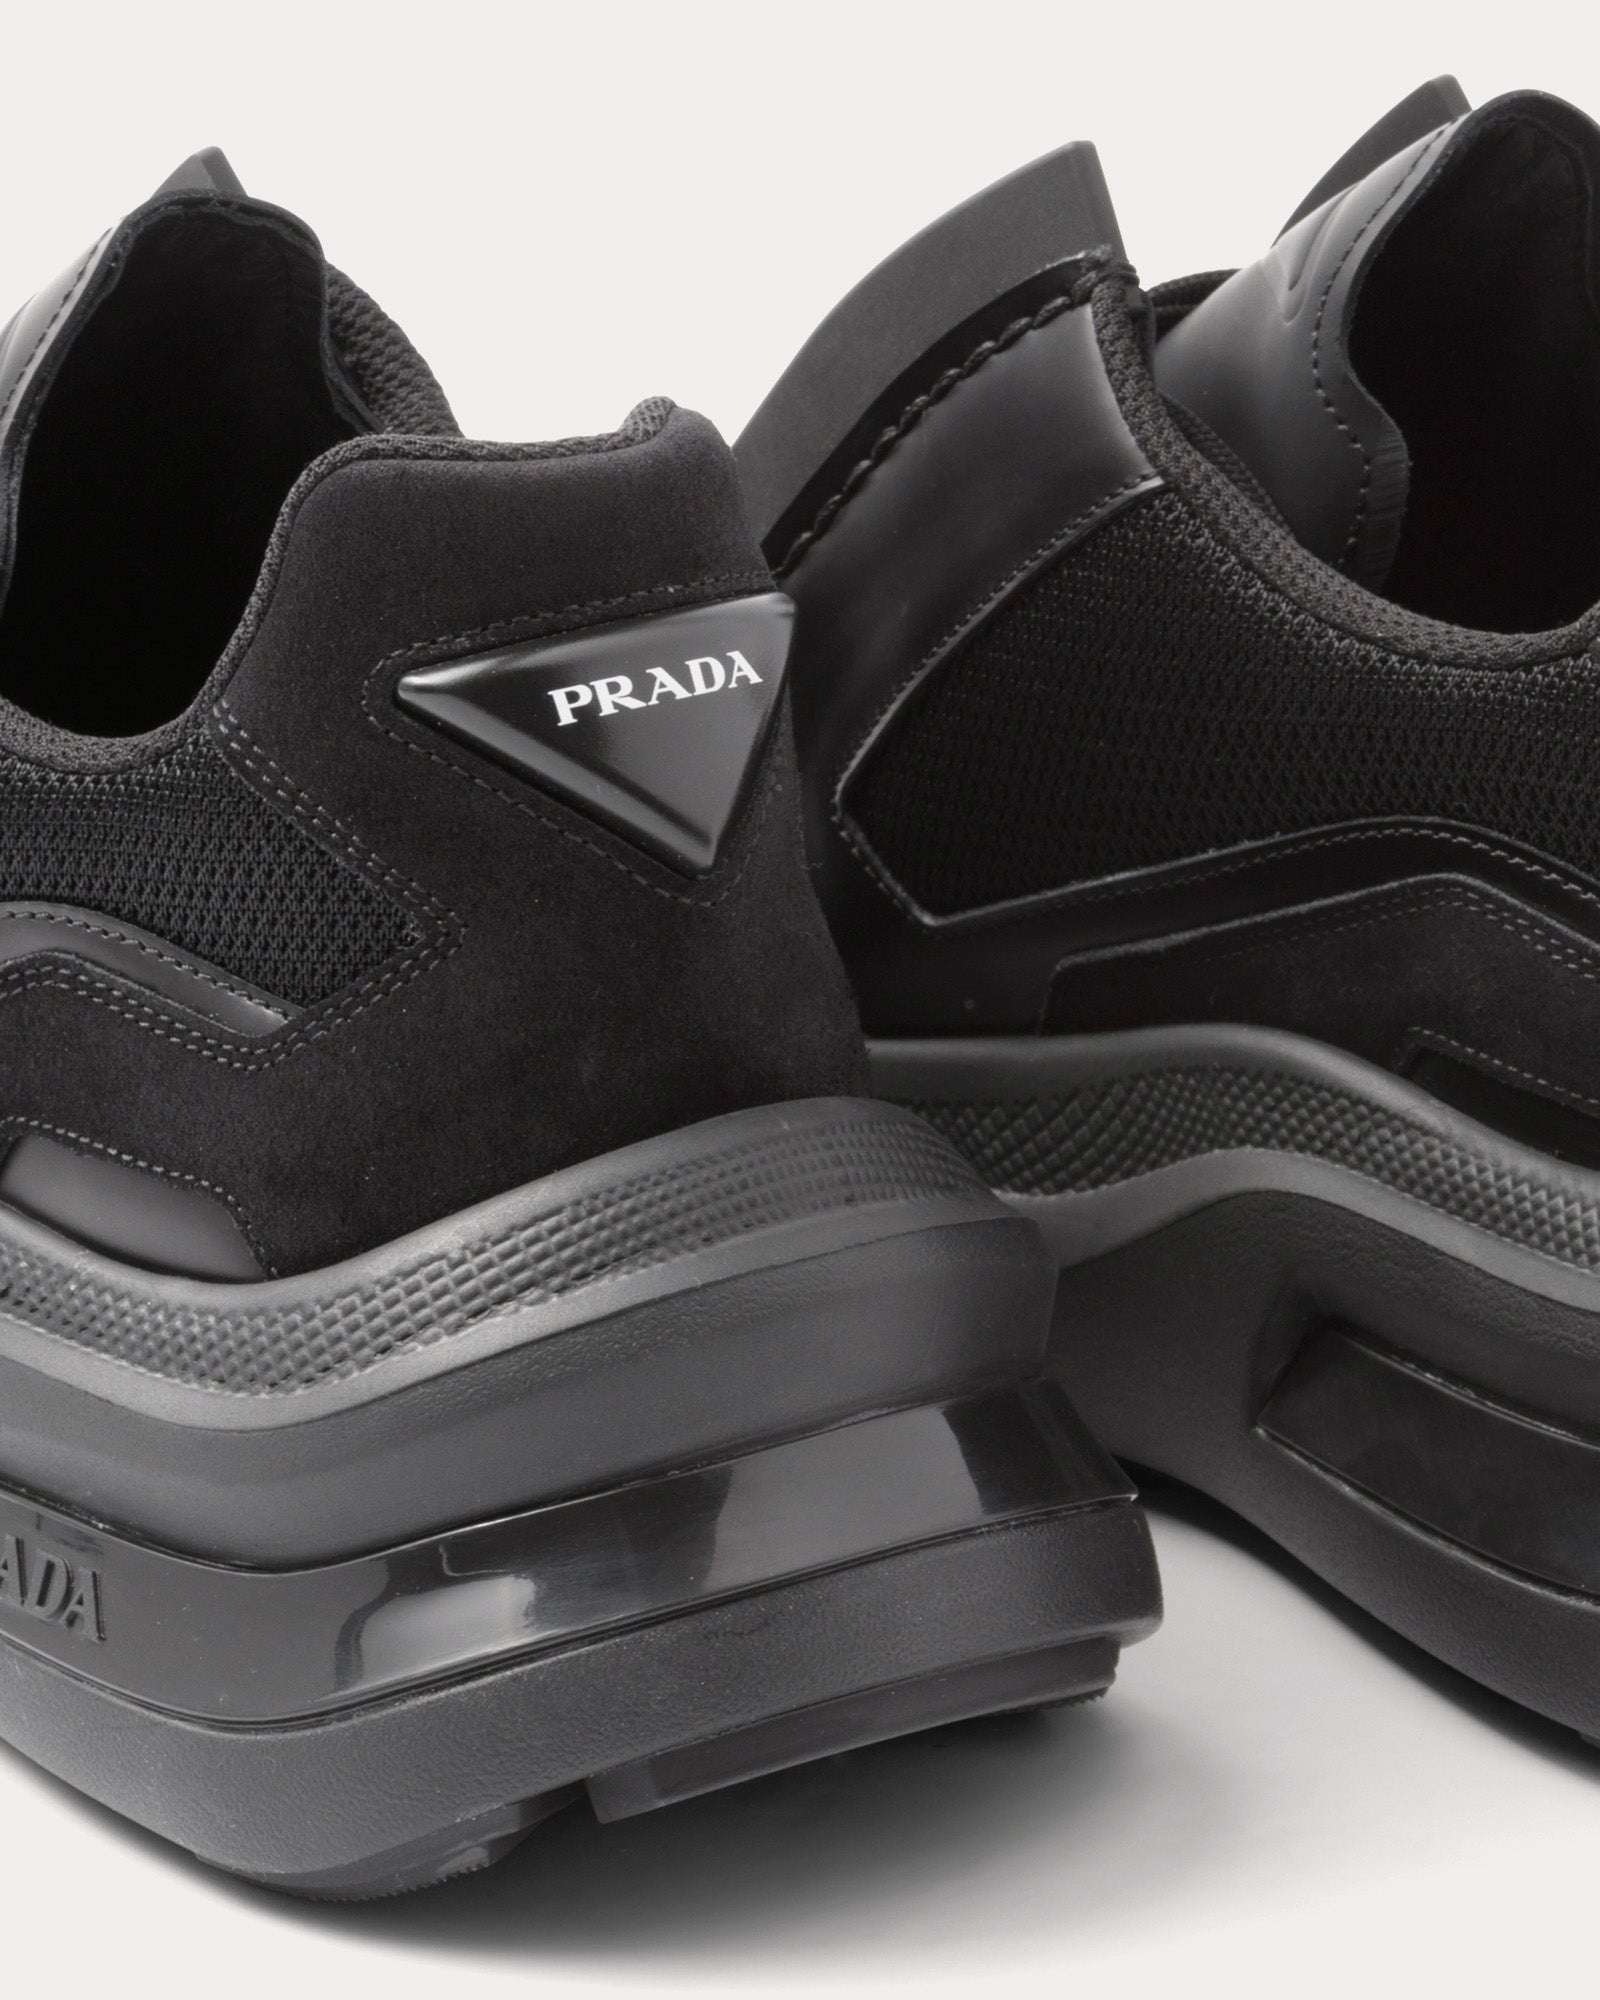 Prada - Systeme Brushed Leather with Bike & Suede Elements Black Low Top Sneakers